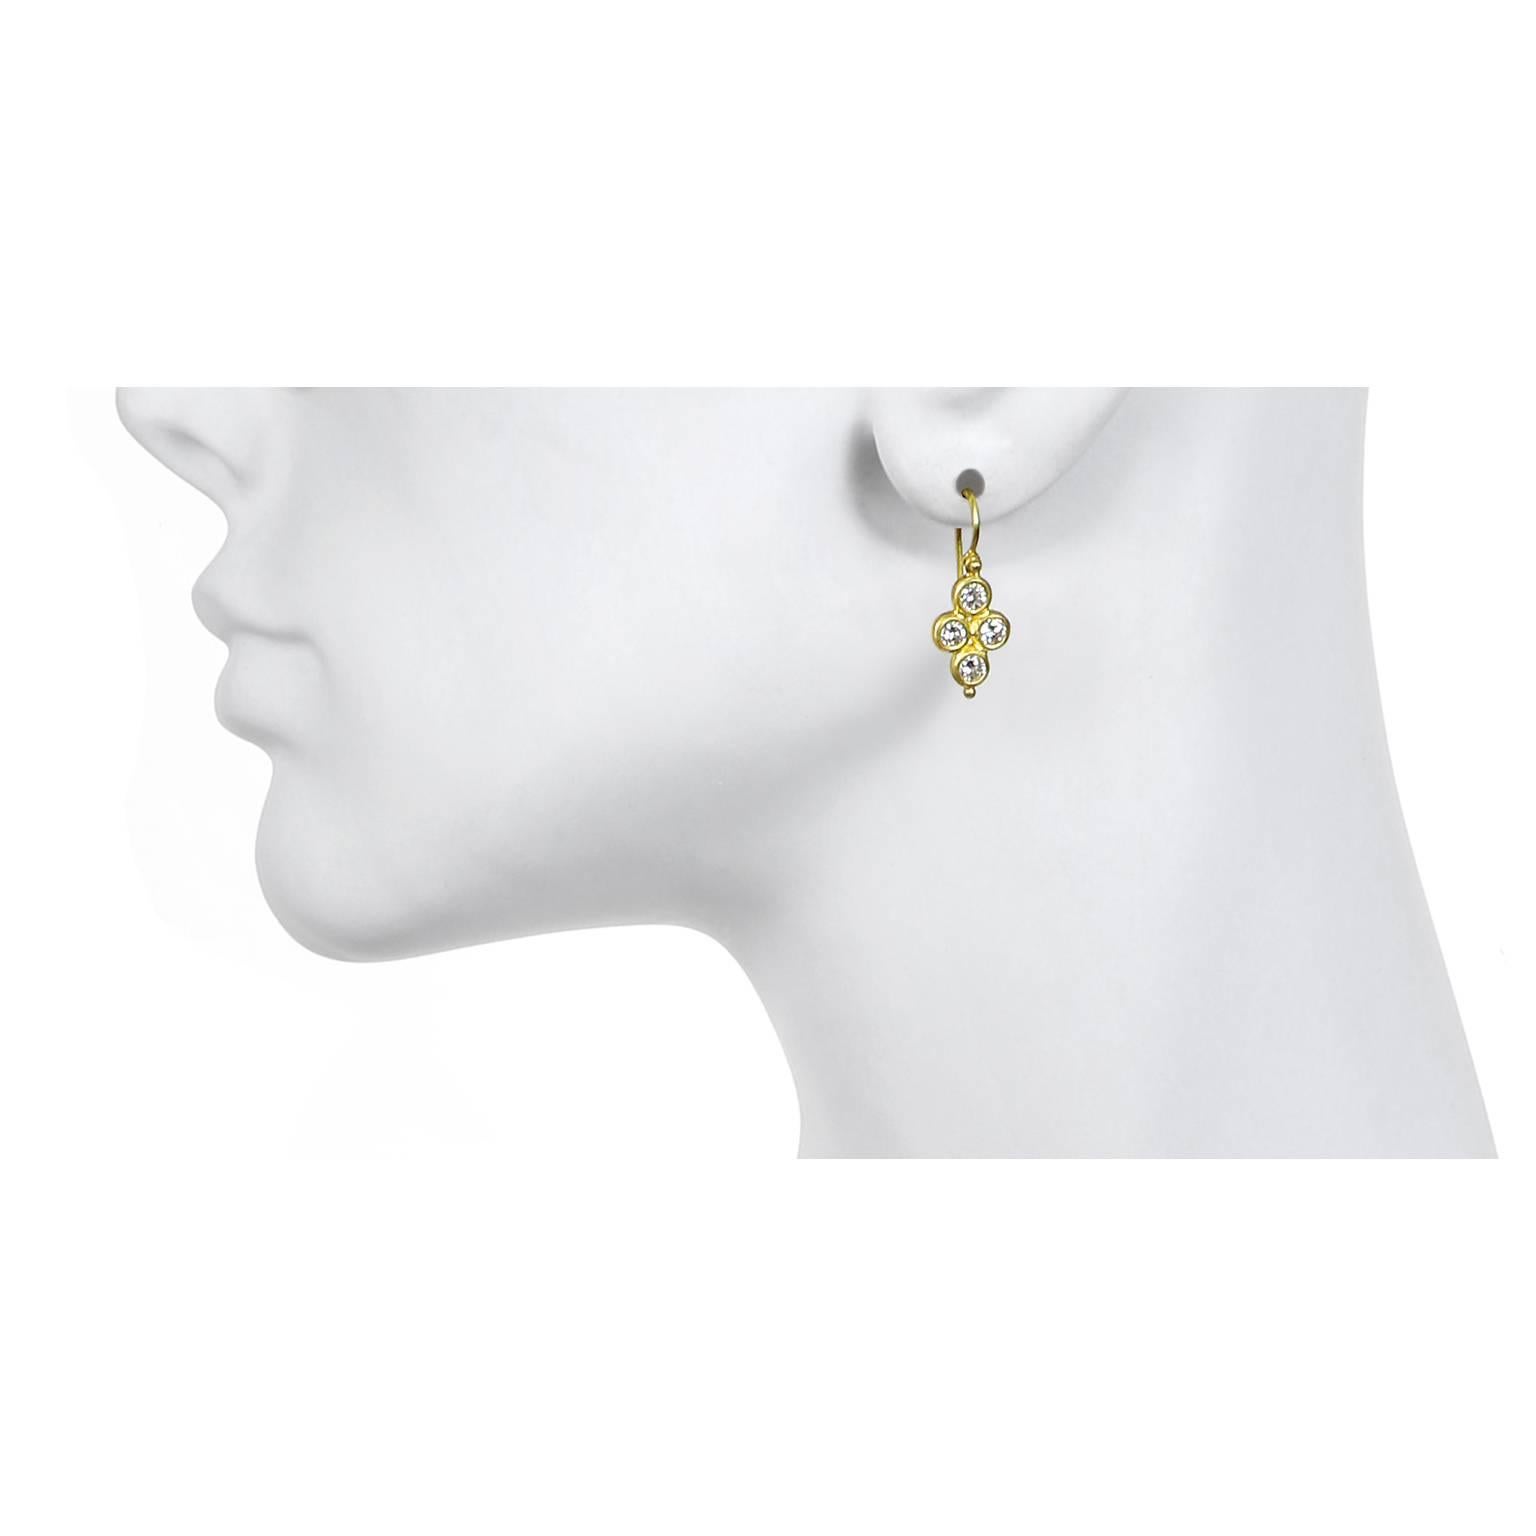 Faye Kim's Diamond Brilliant Cut Hinged Quad Drop Earrings are handcrafted in 18 karat gold. The quad design with hinged ear wires is bright and lively with movement. The perfect diamond drop earrings, lightweight and full of impact.

Diamonds: 